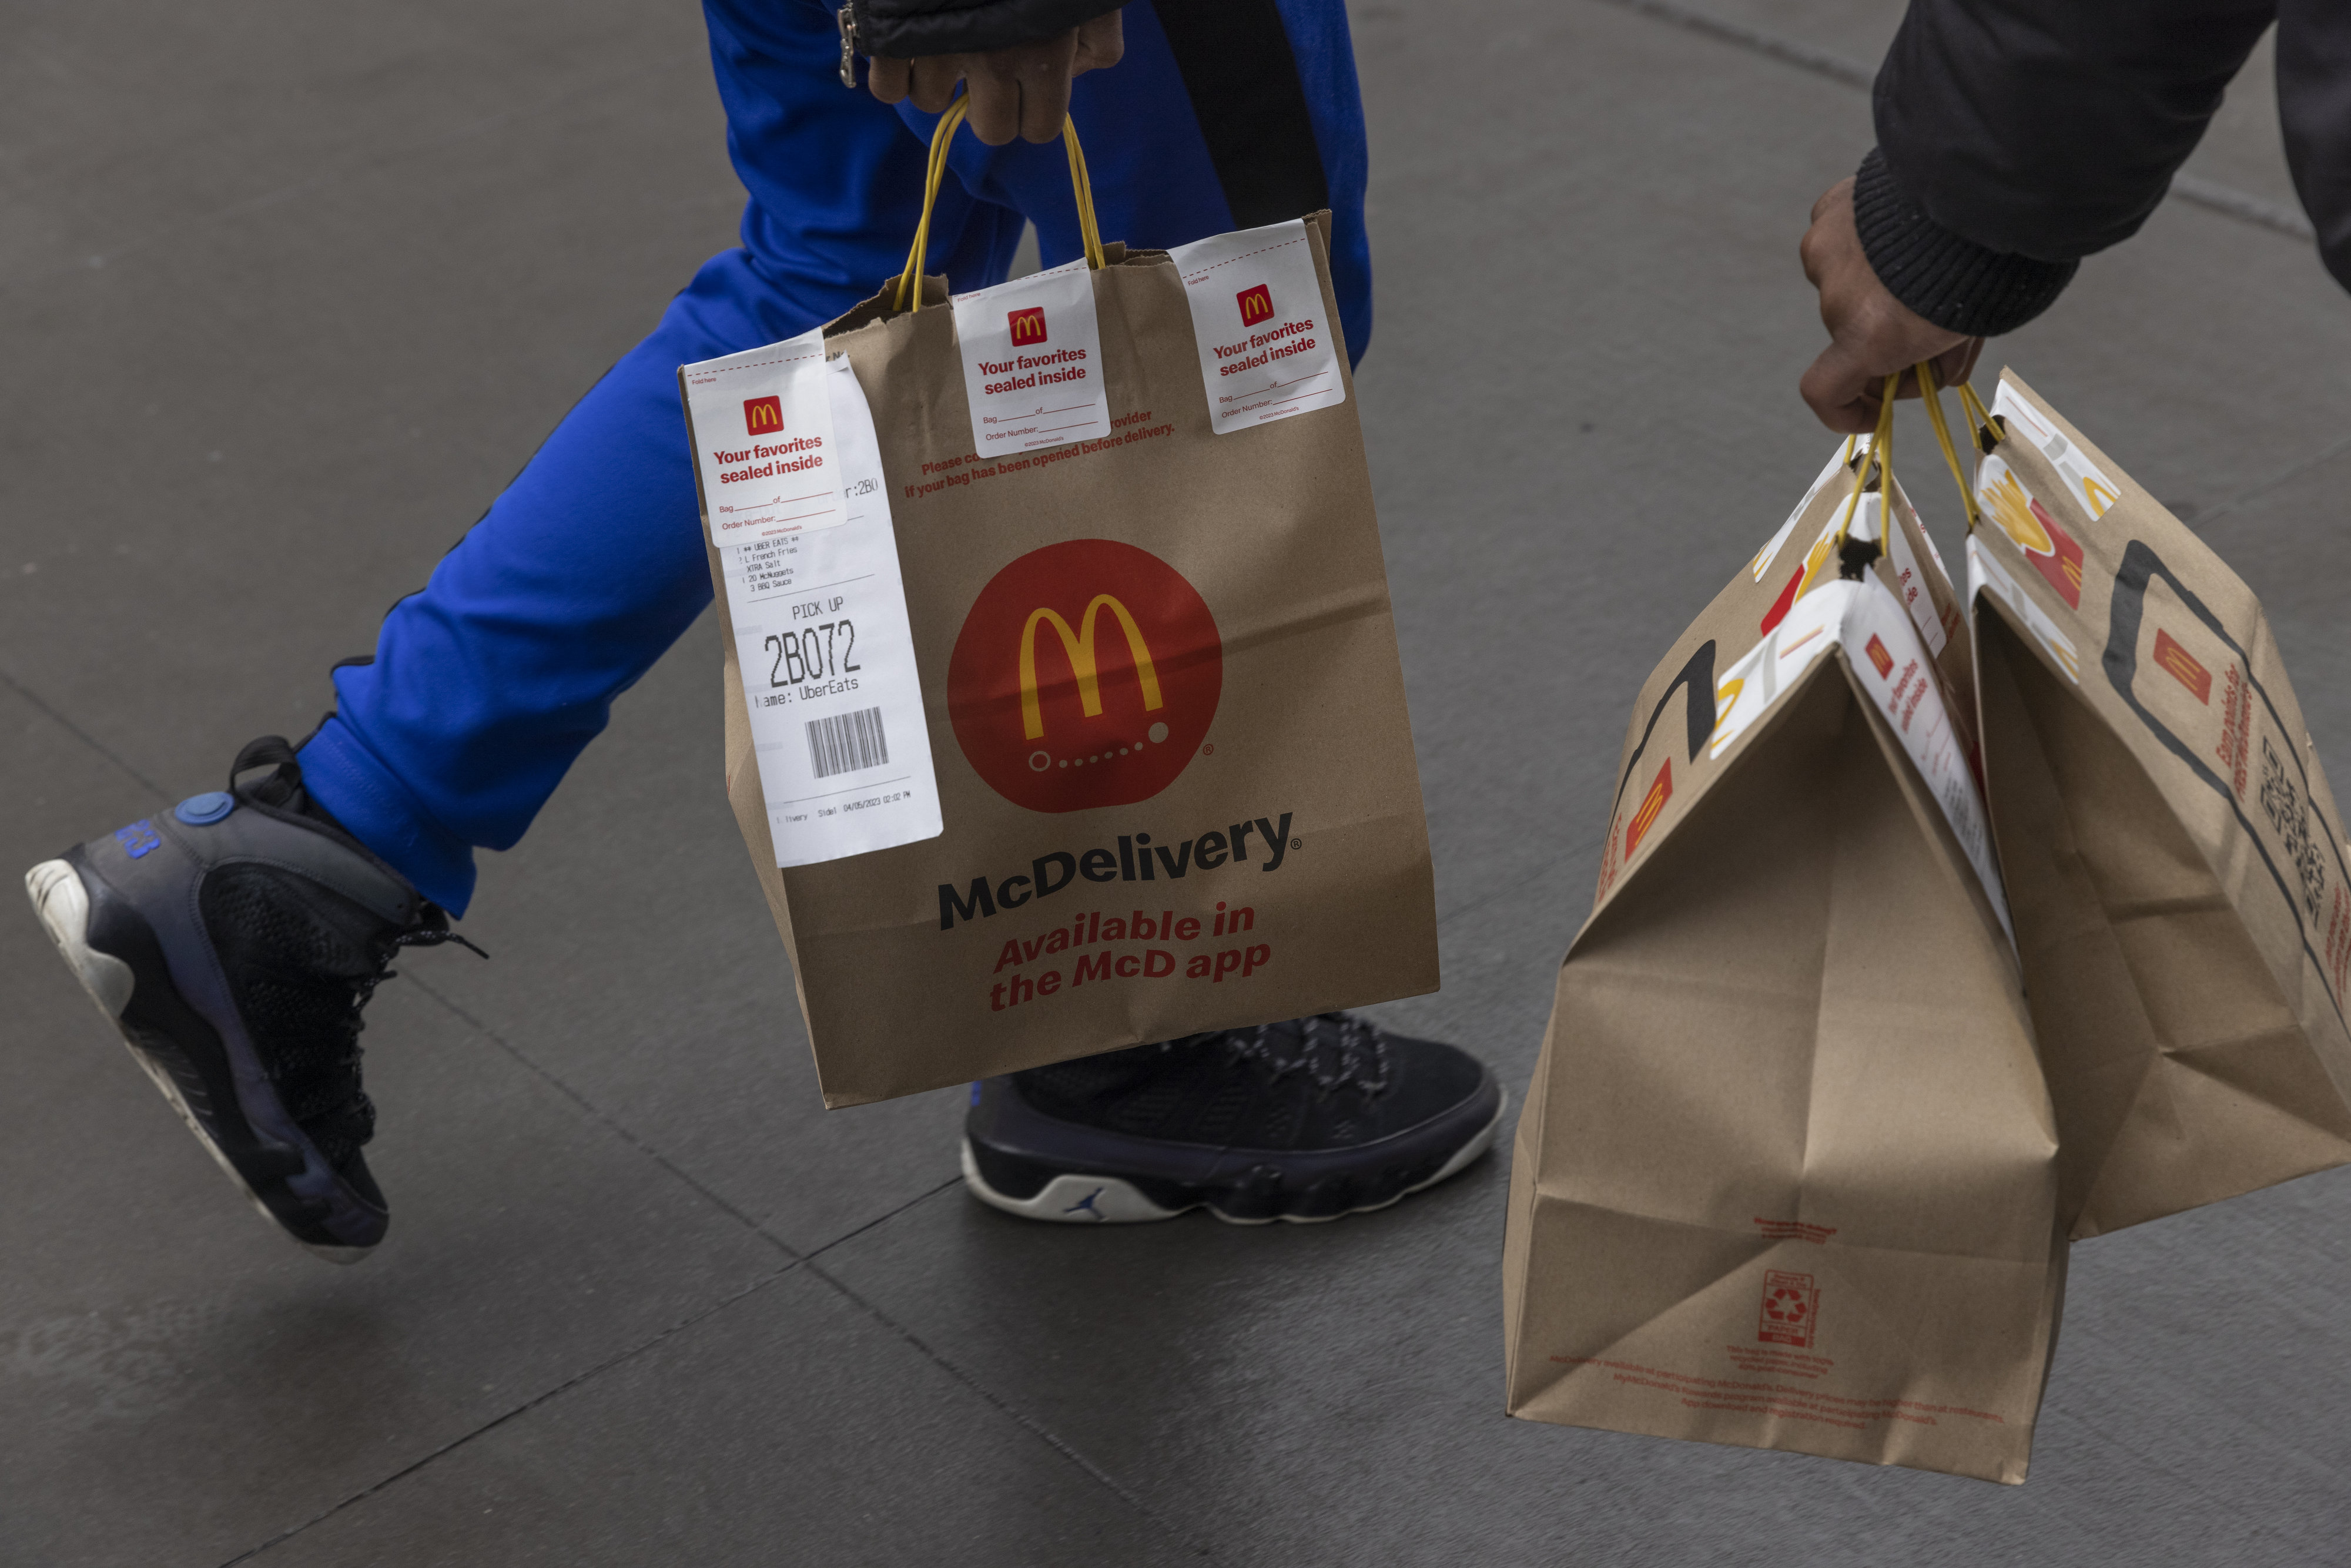 McDonald’s Locations As Corporate Offices Cut Hundreds of Jobs